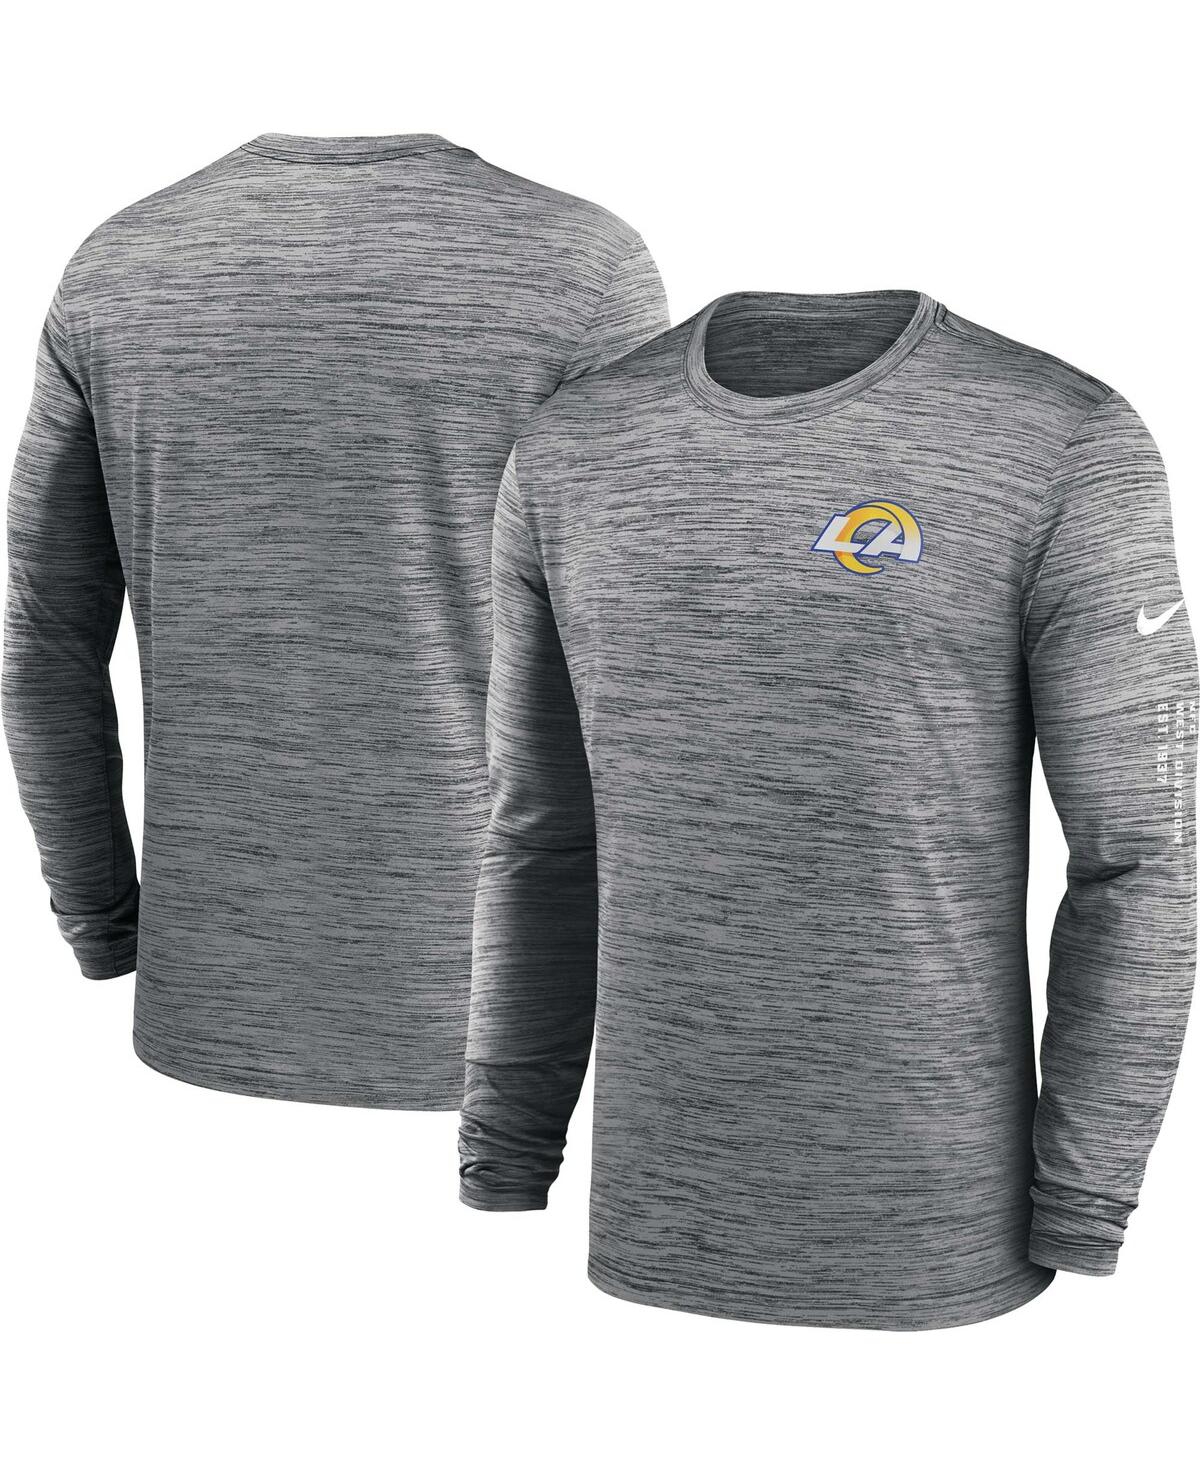 Shop Nike Men's  Anthracite Los Angeles Rams Velocity Long Sleeve T-shirt